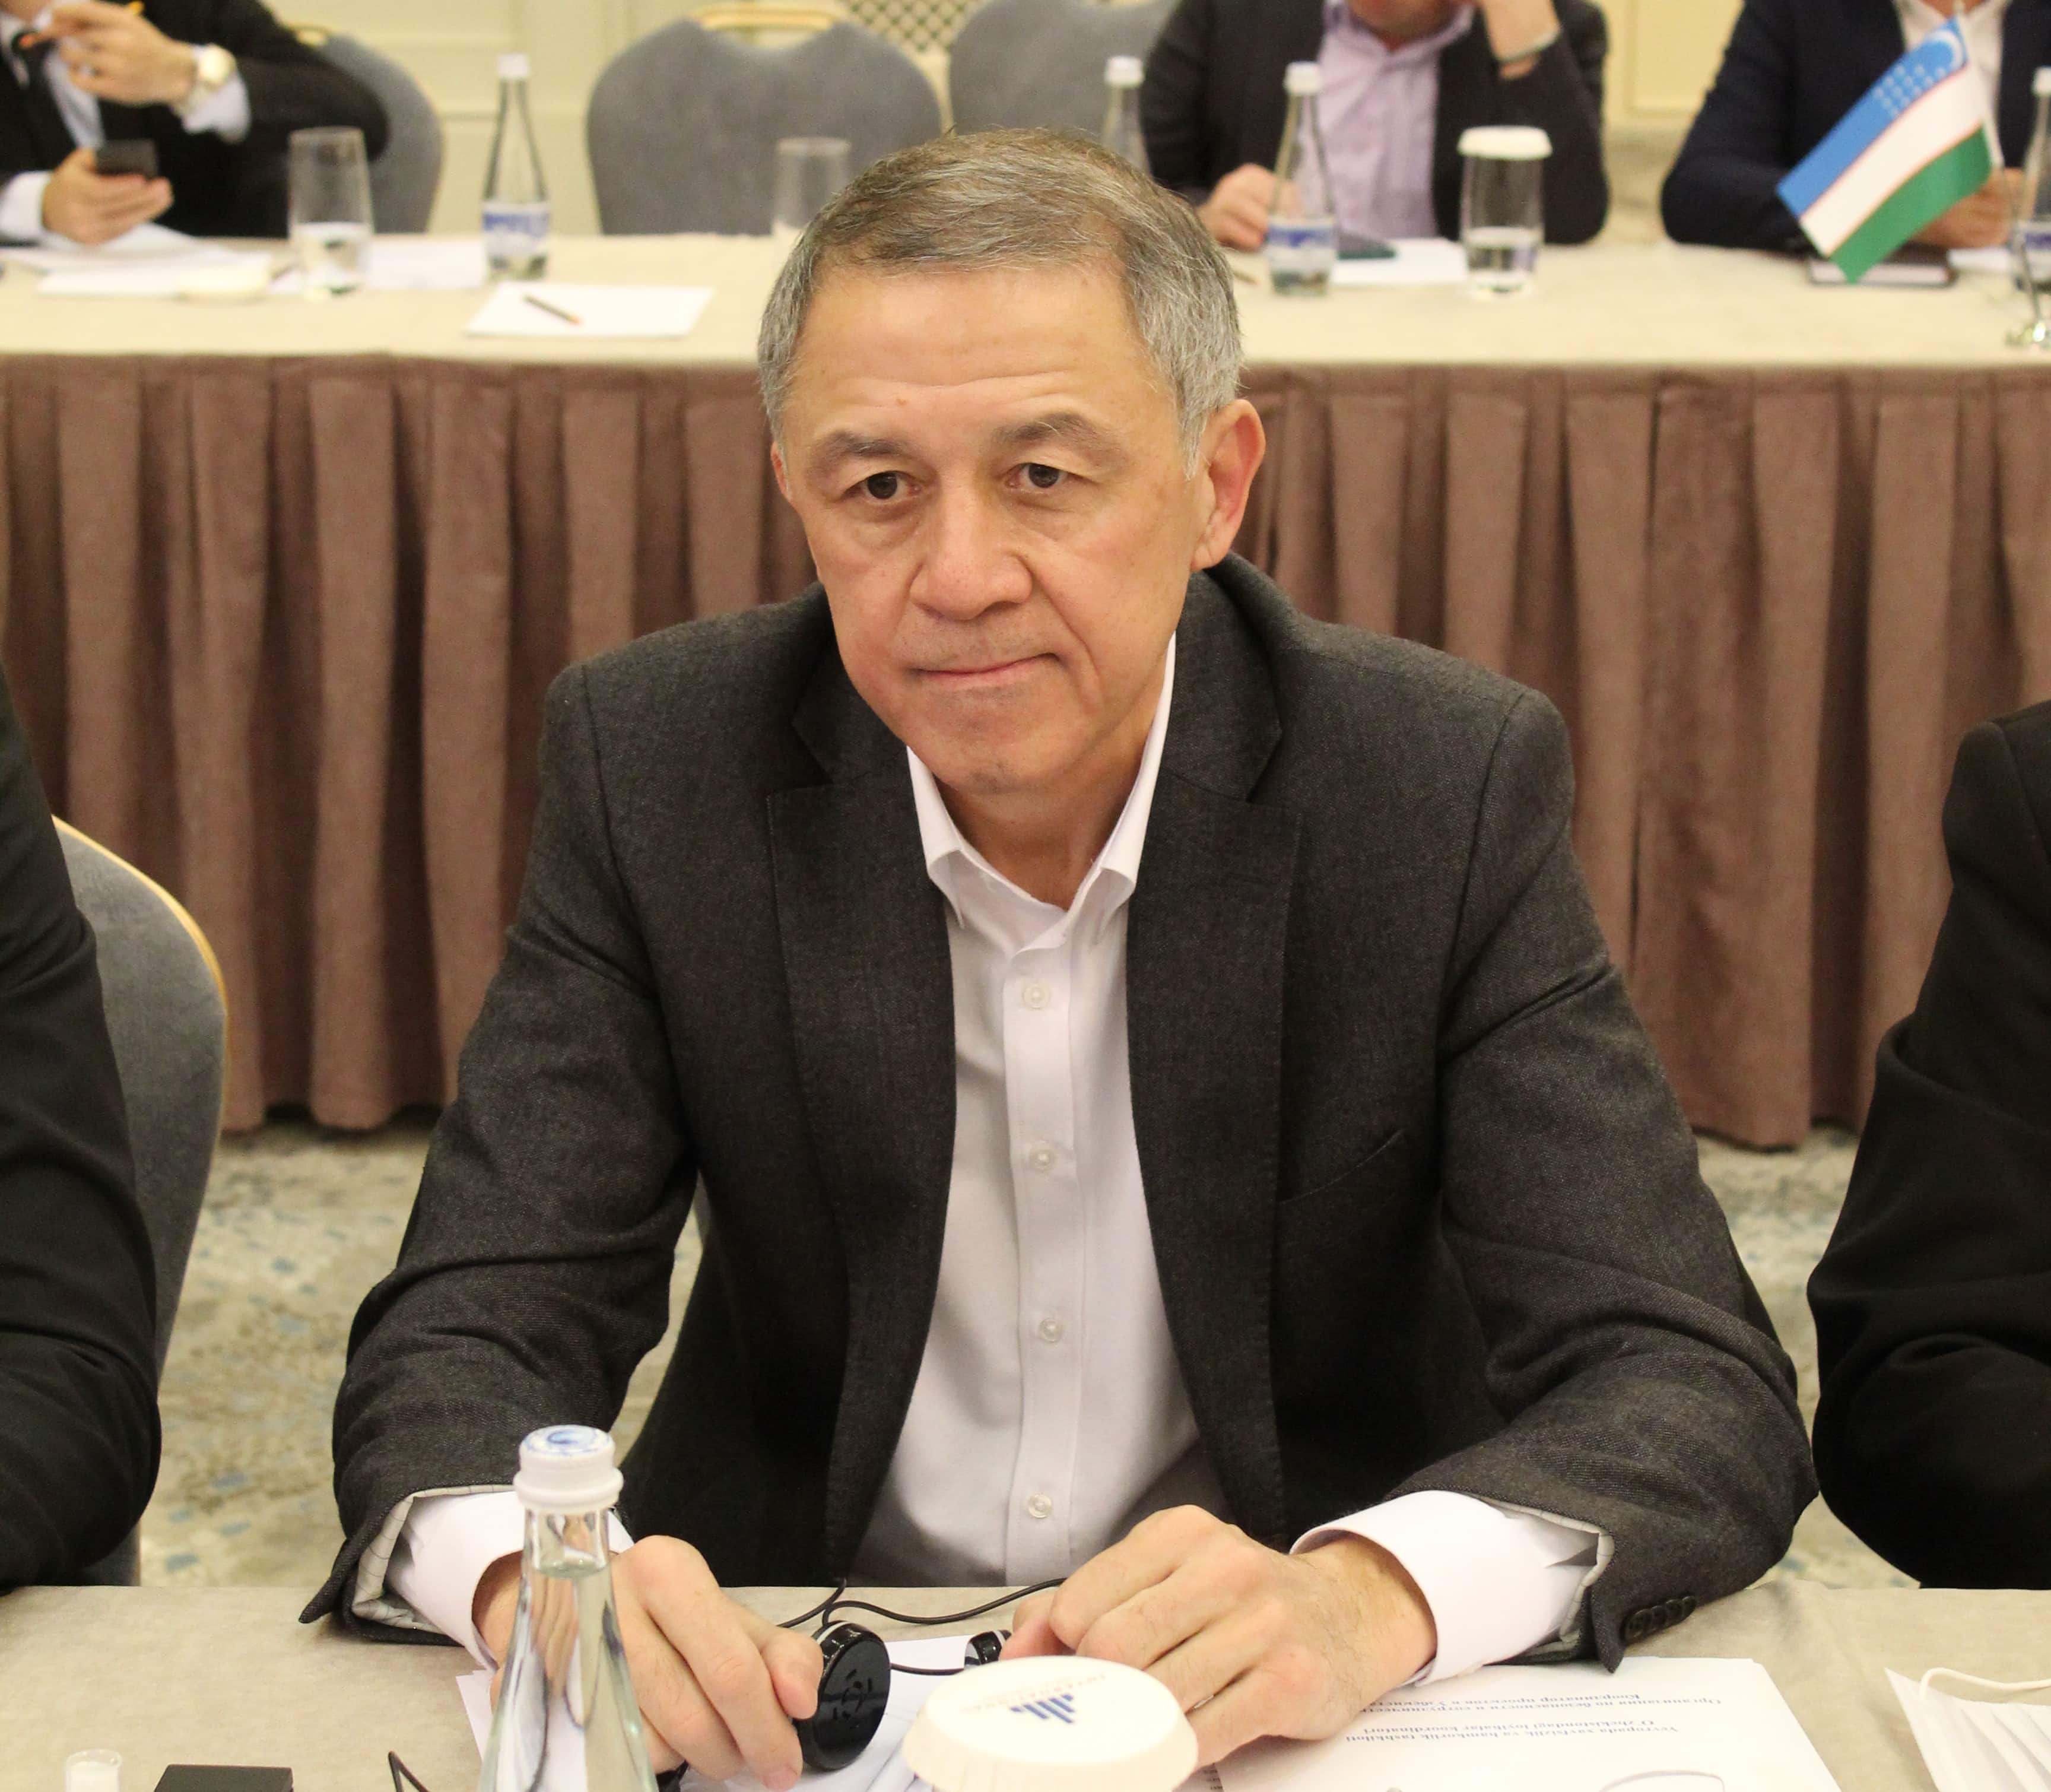 The regional representative of the Ombudsman in the Fergana region resolves the issues contained in the appeals received during the visiting reception